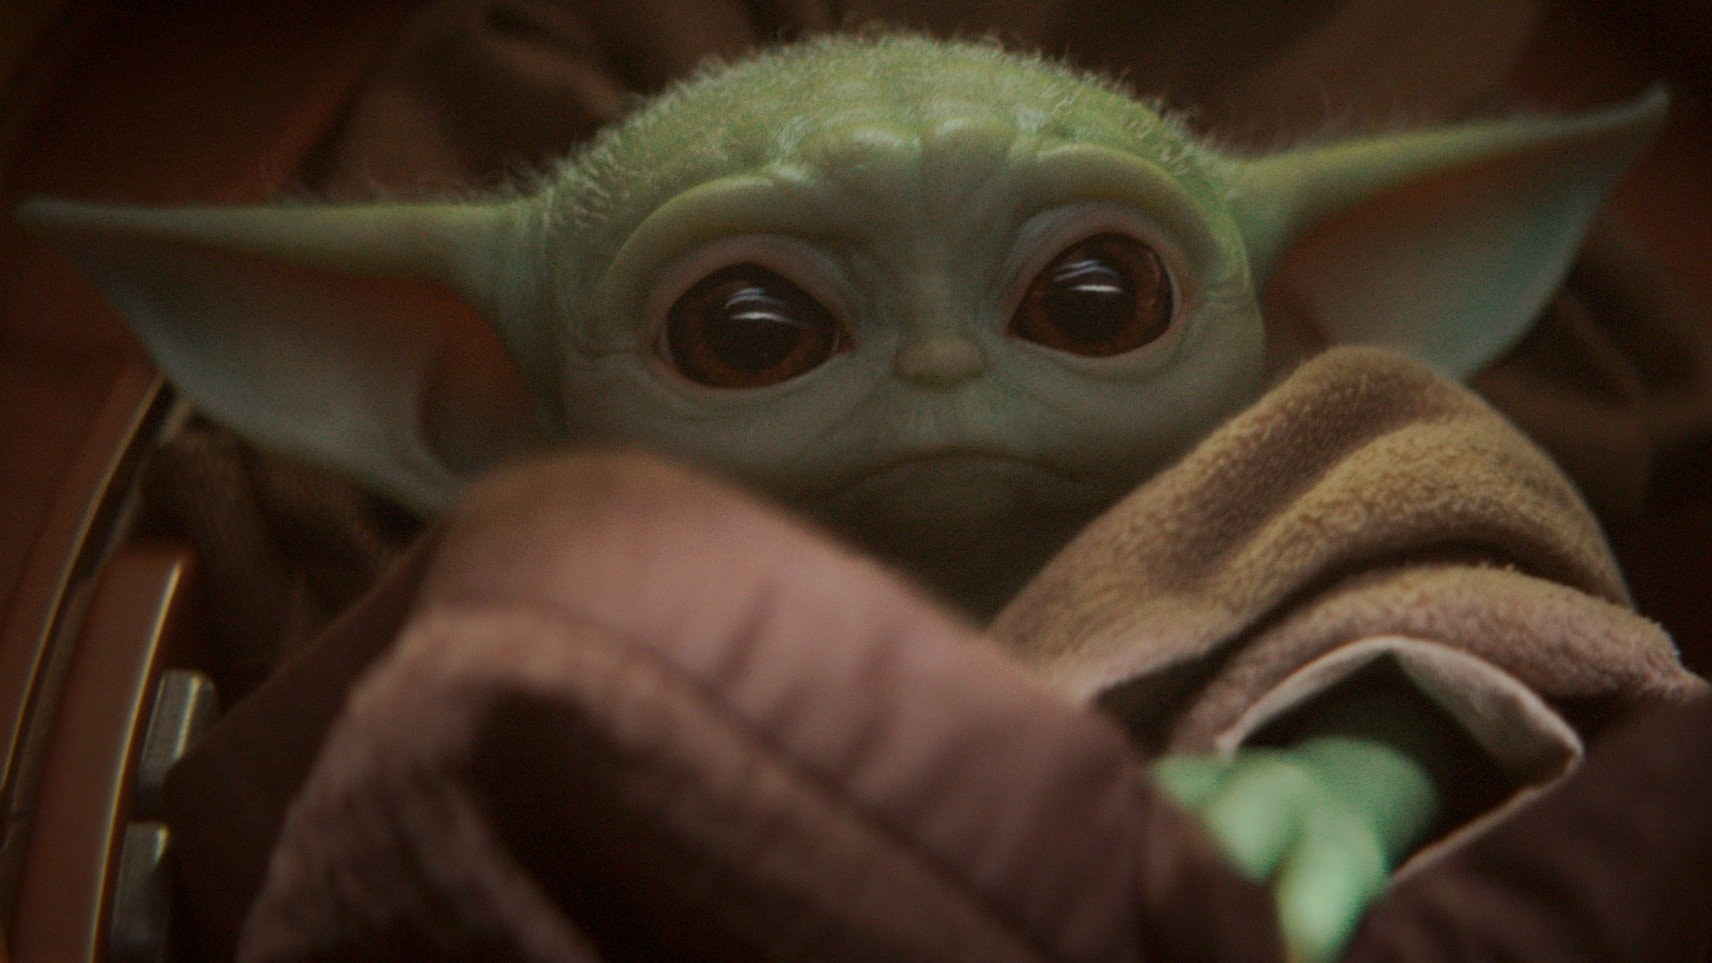 Baby Yoda's physical development is odd, but not entirely unprecedented